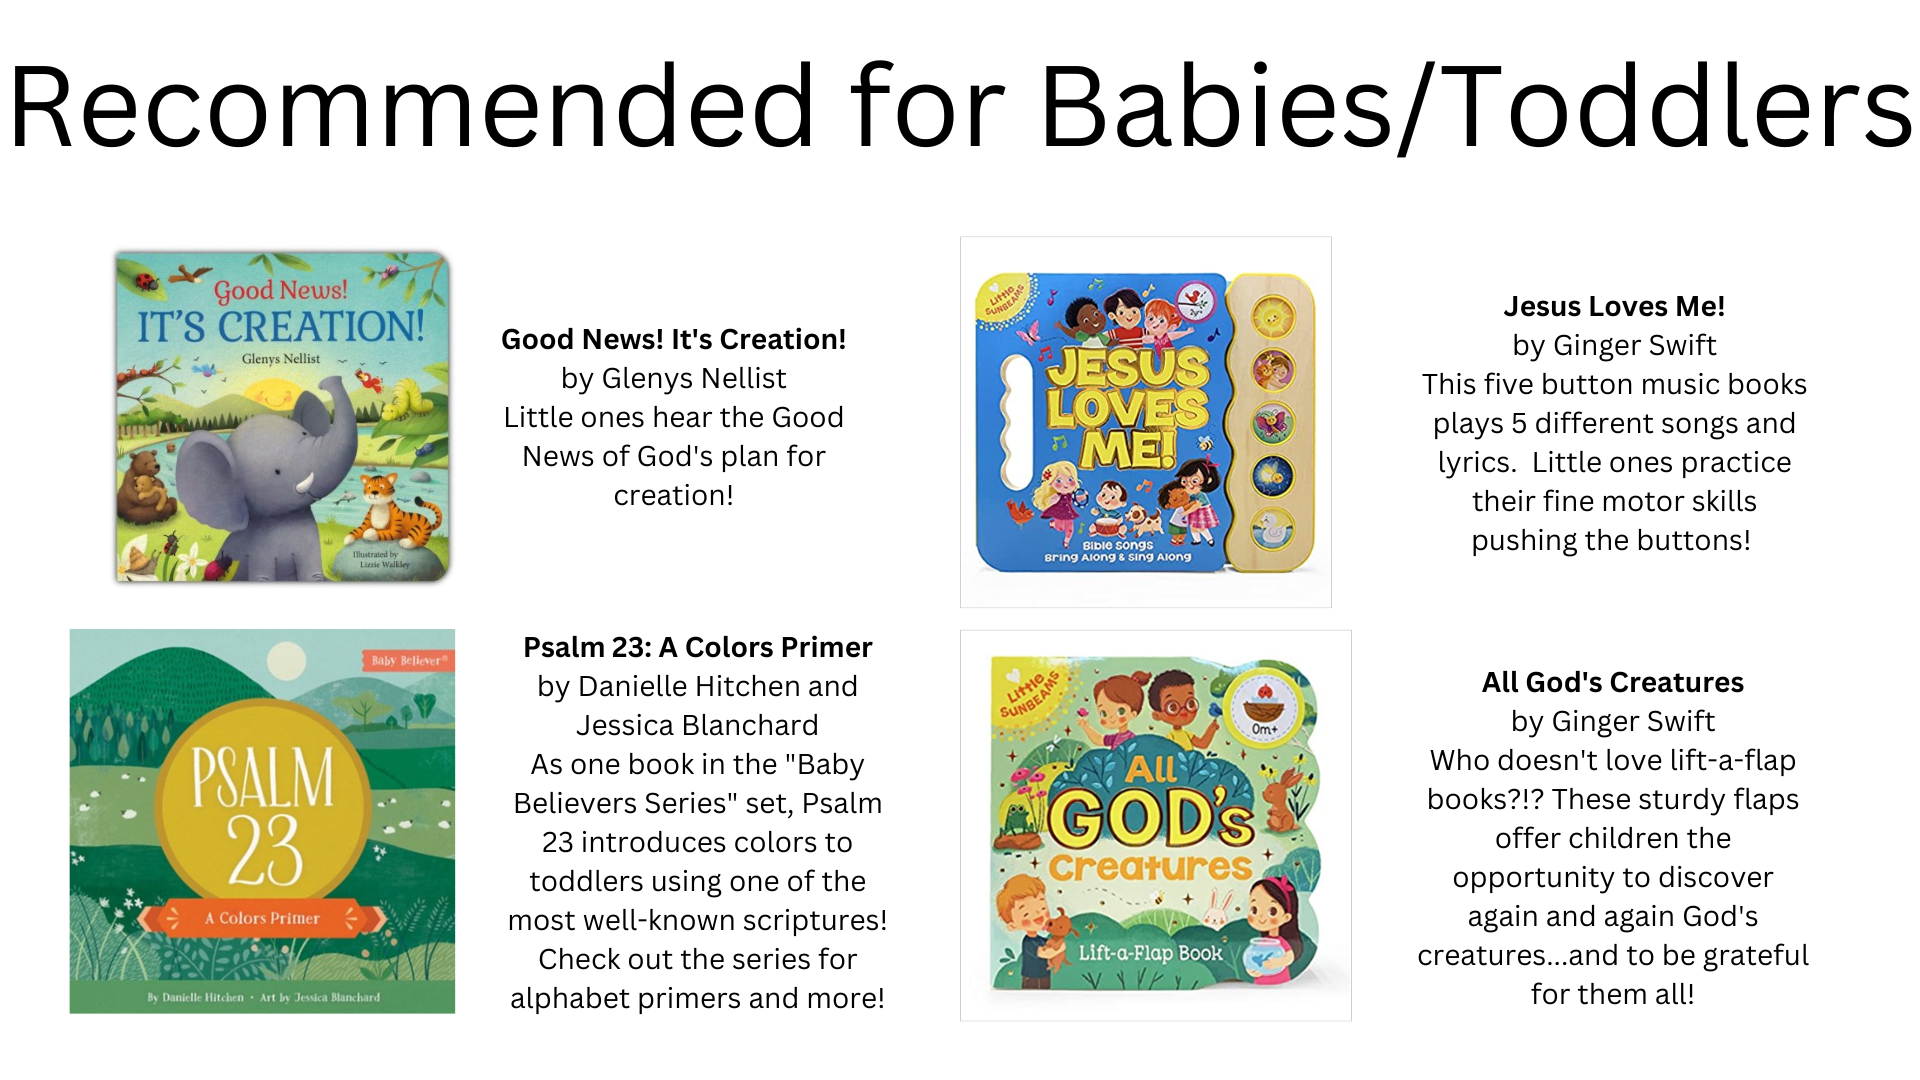 Recommended for BabiesToddlers